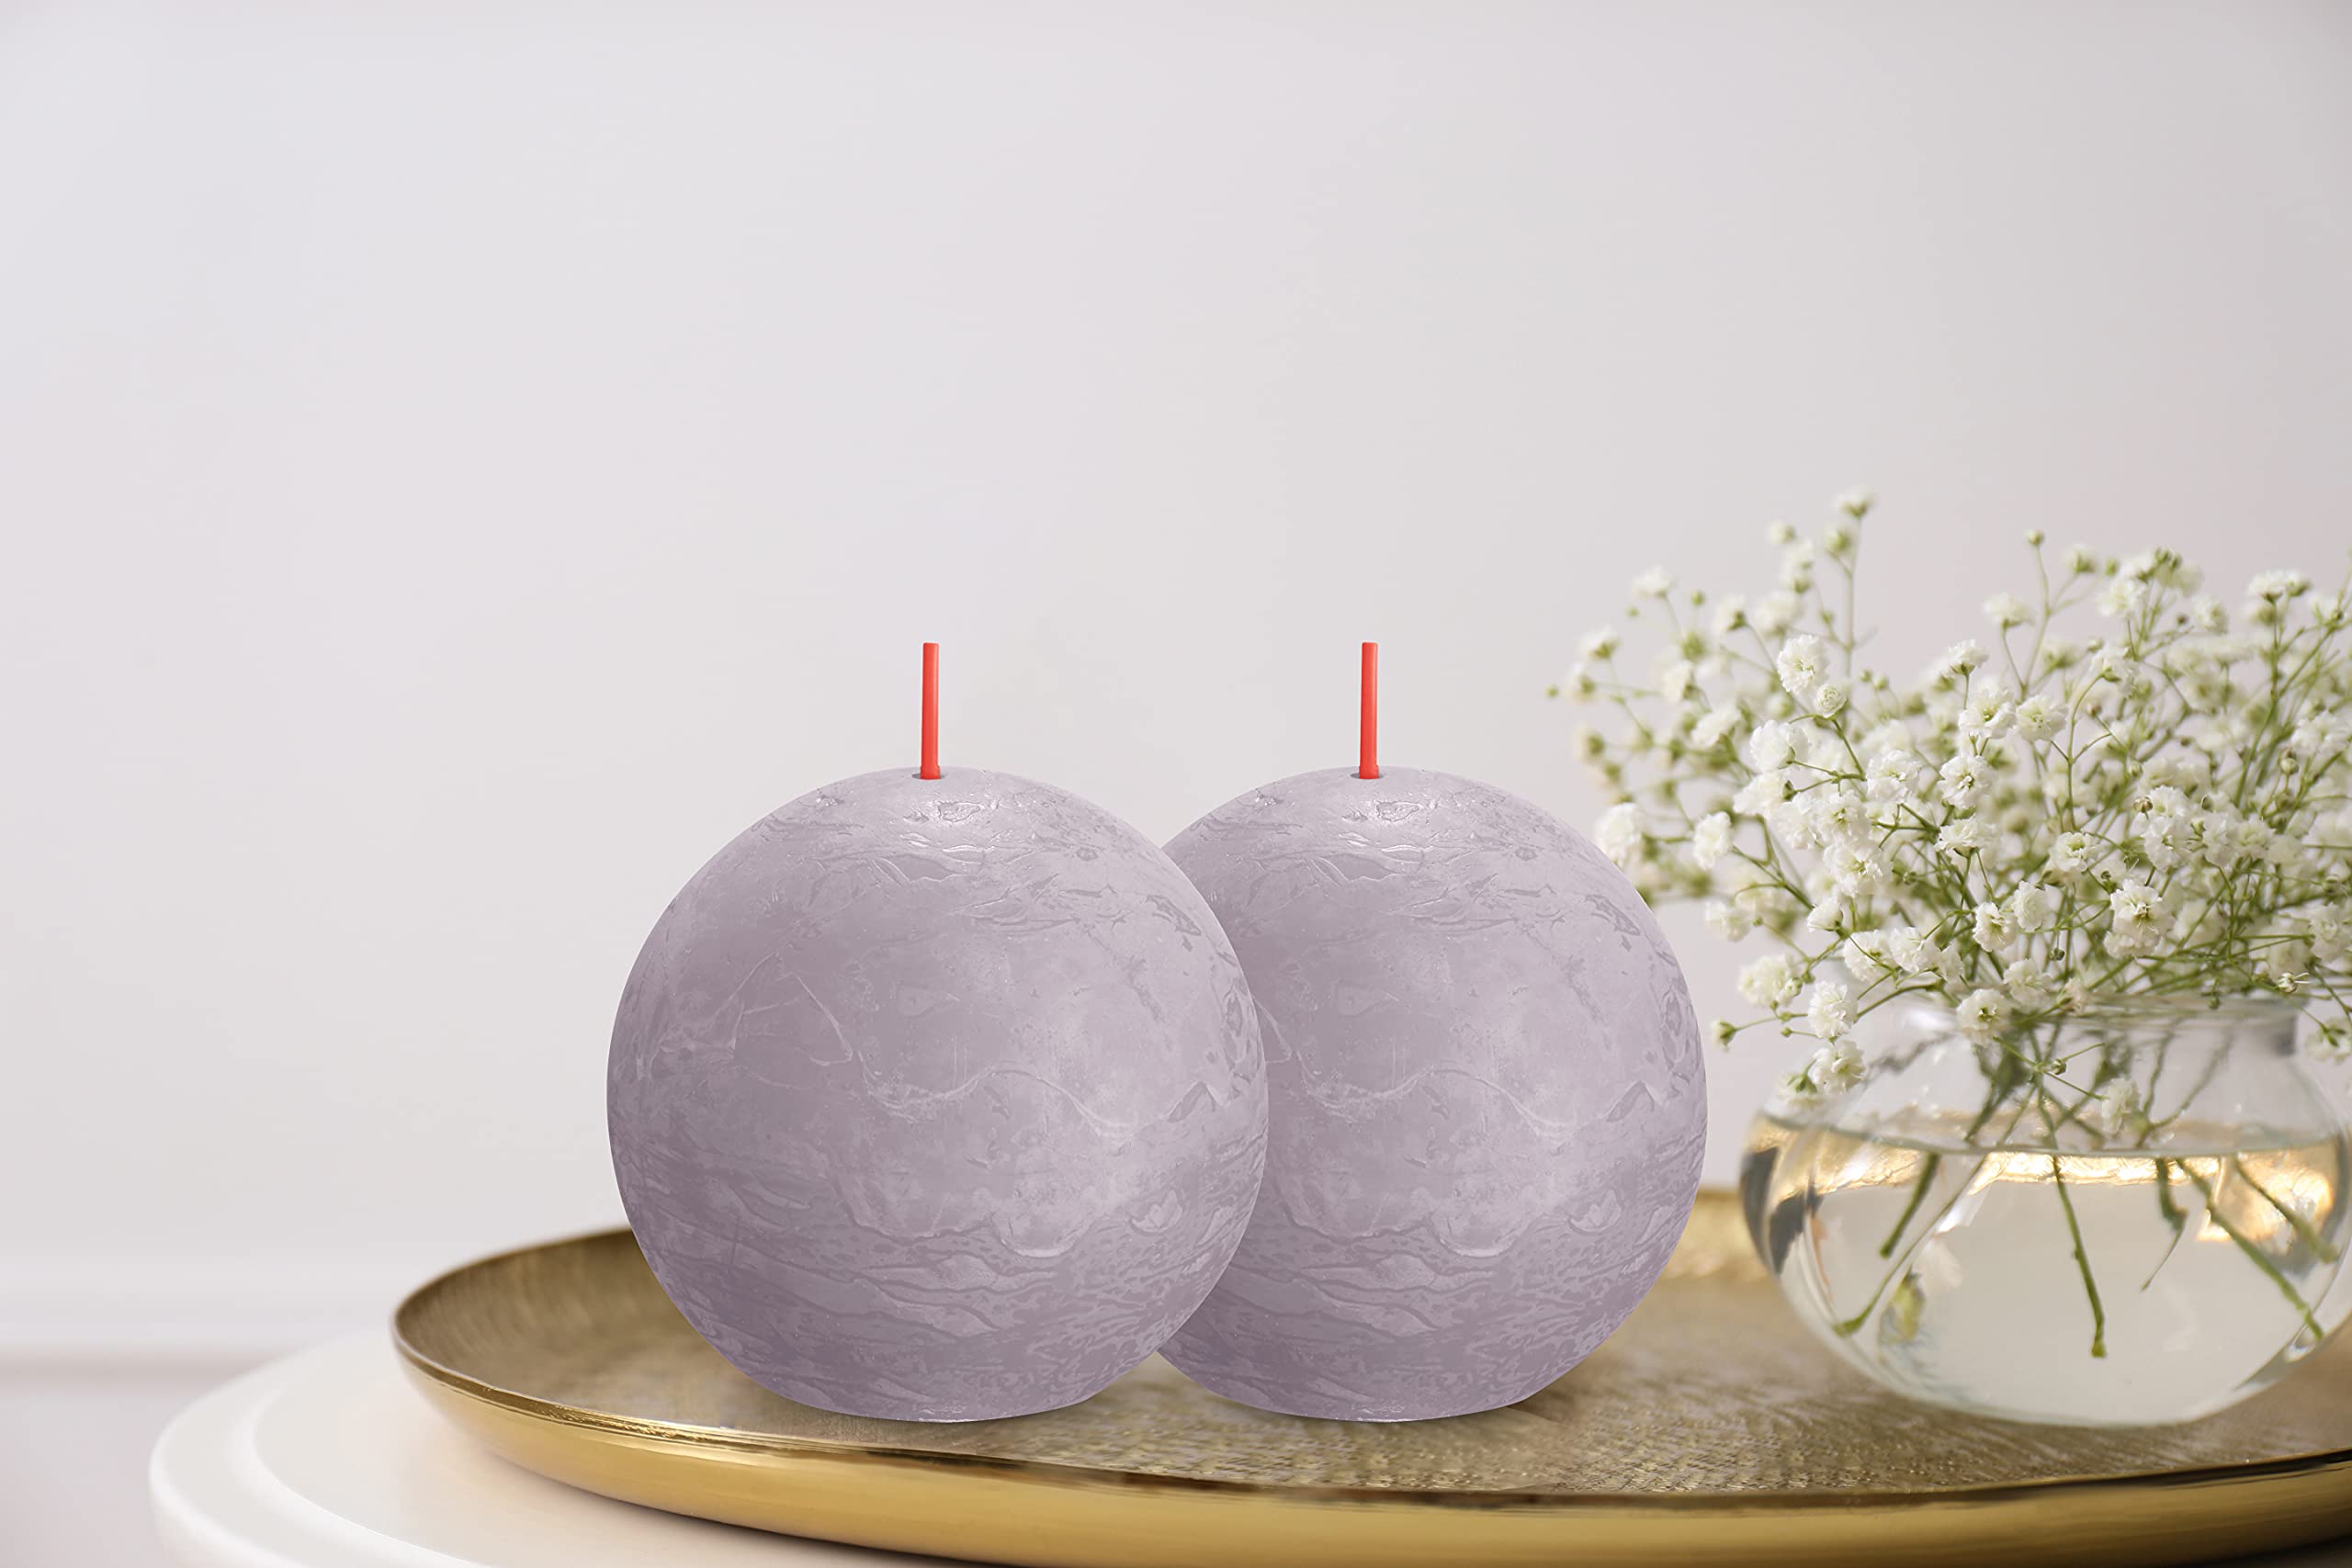 BOLSIUS 3 Pack Frosted Lavender Rustic Ball Pillar Candles - 3 Inch - Premium European Quality - Includes Natural Plant-Based Wax - Unscented Dripless Smokeless 25 Hour Party D�cor Candles  - Collectible Very Good